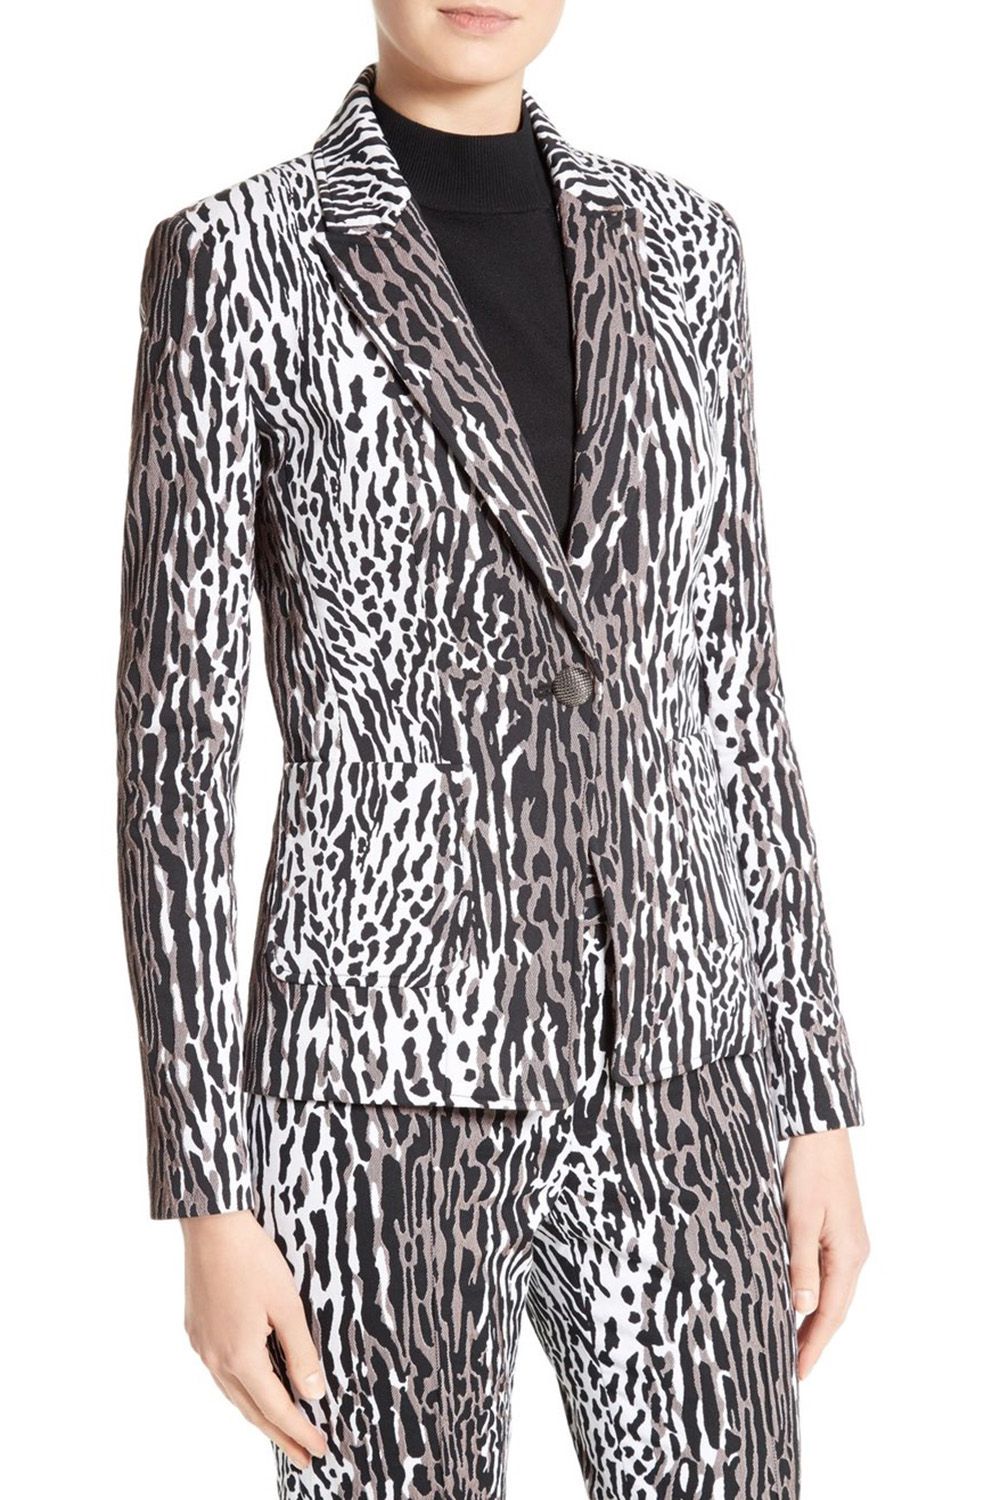 St. John Collection Leopard Stretch Jacquard Jacket, $995, and Ankle Pants, $495